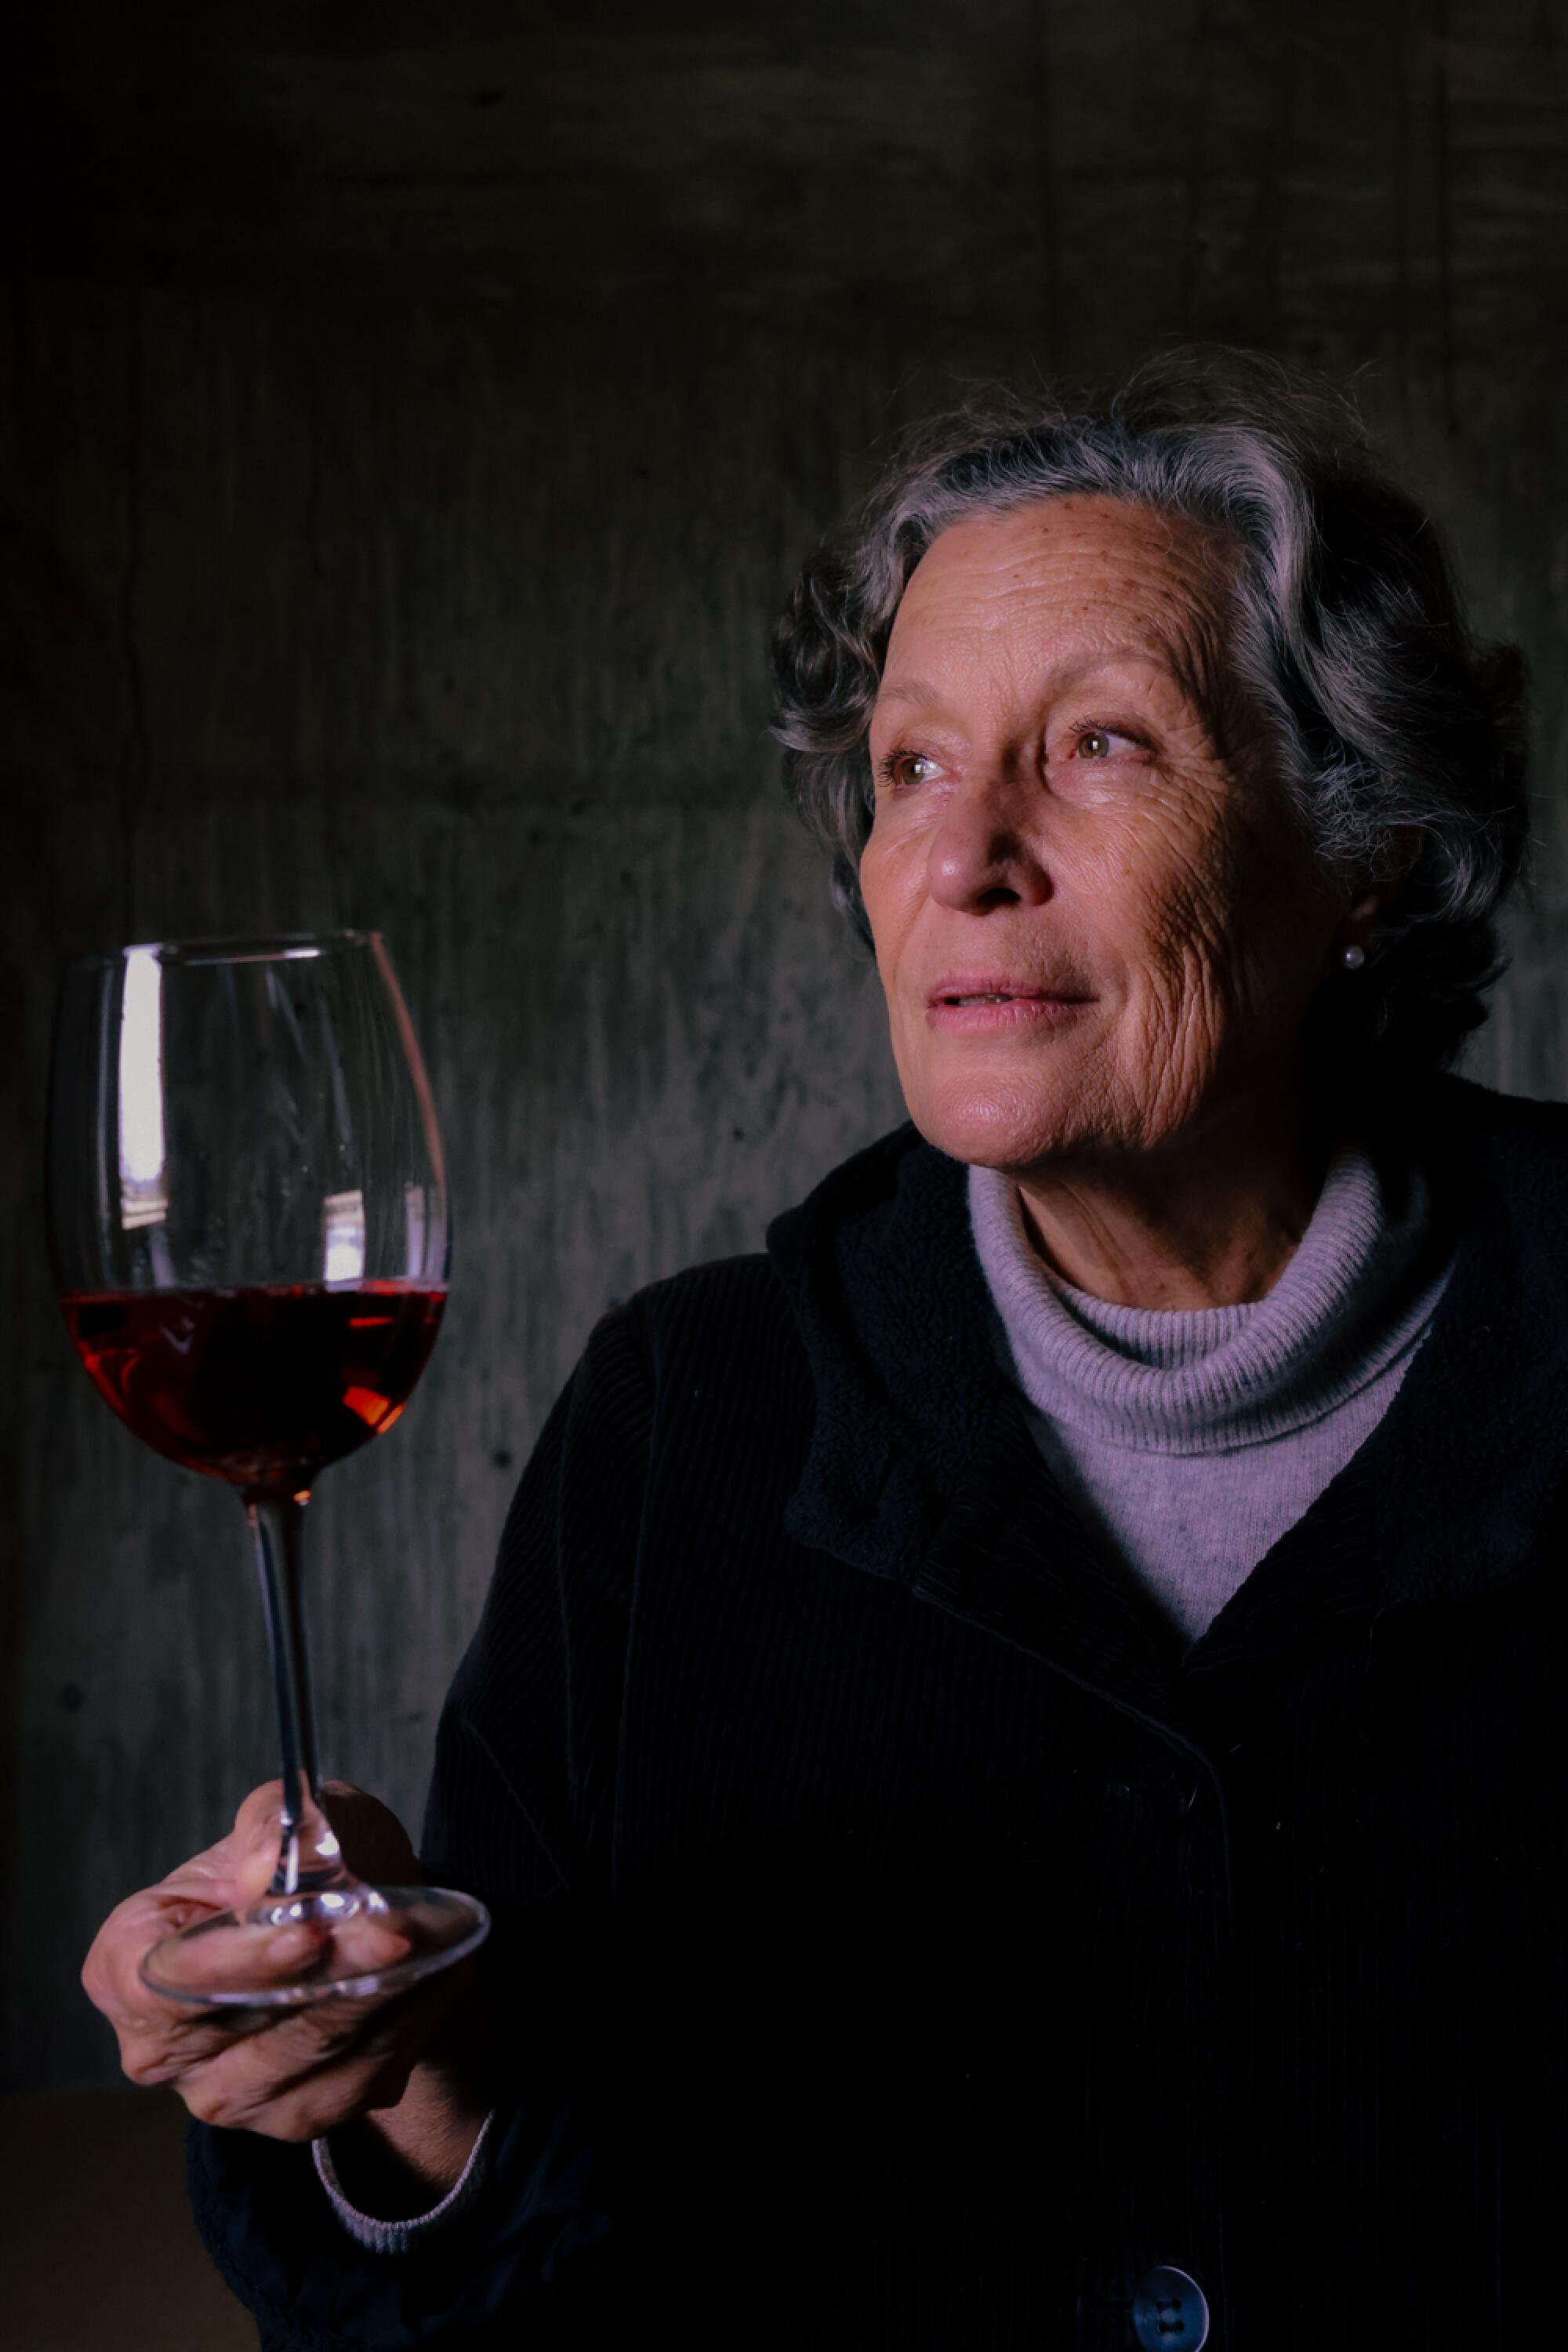 An older woman holding a wineglass of red wine by its base